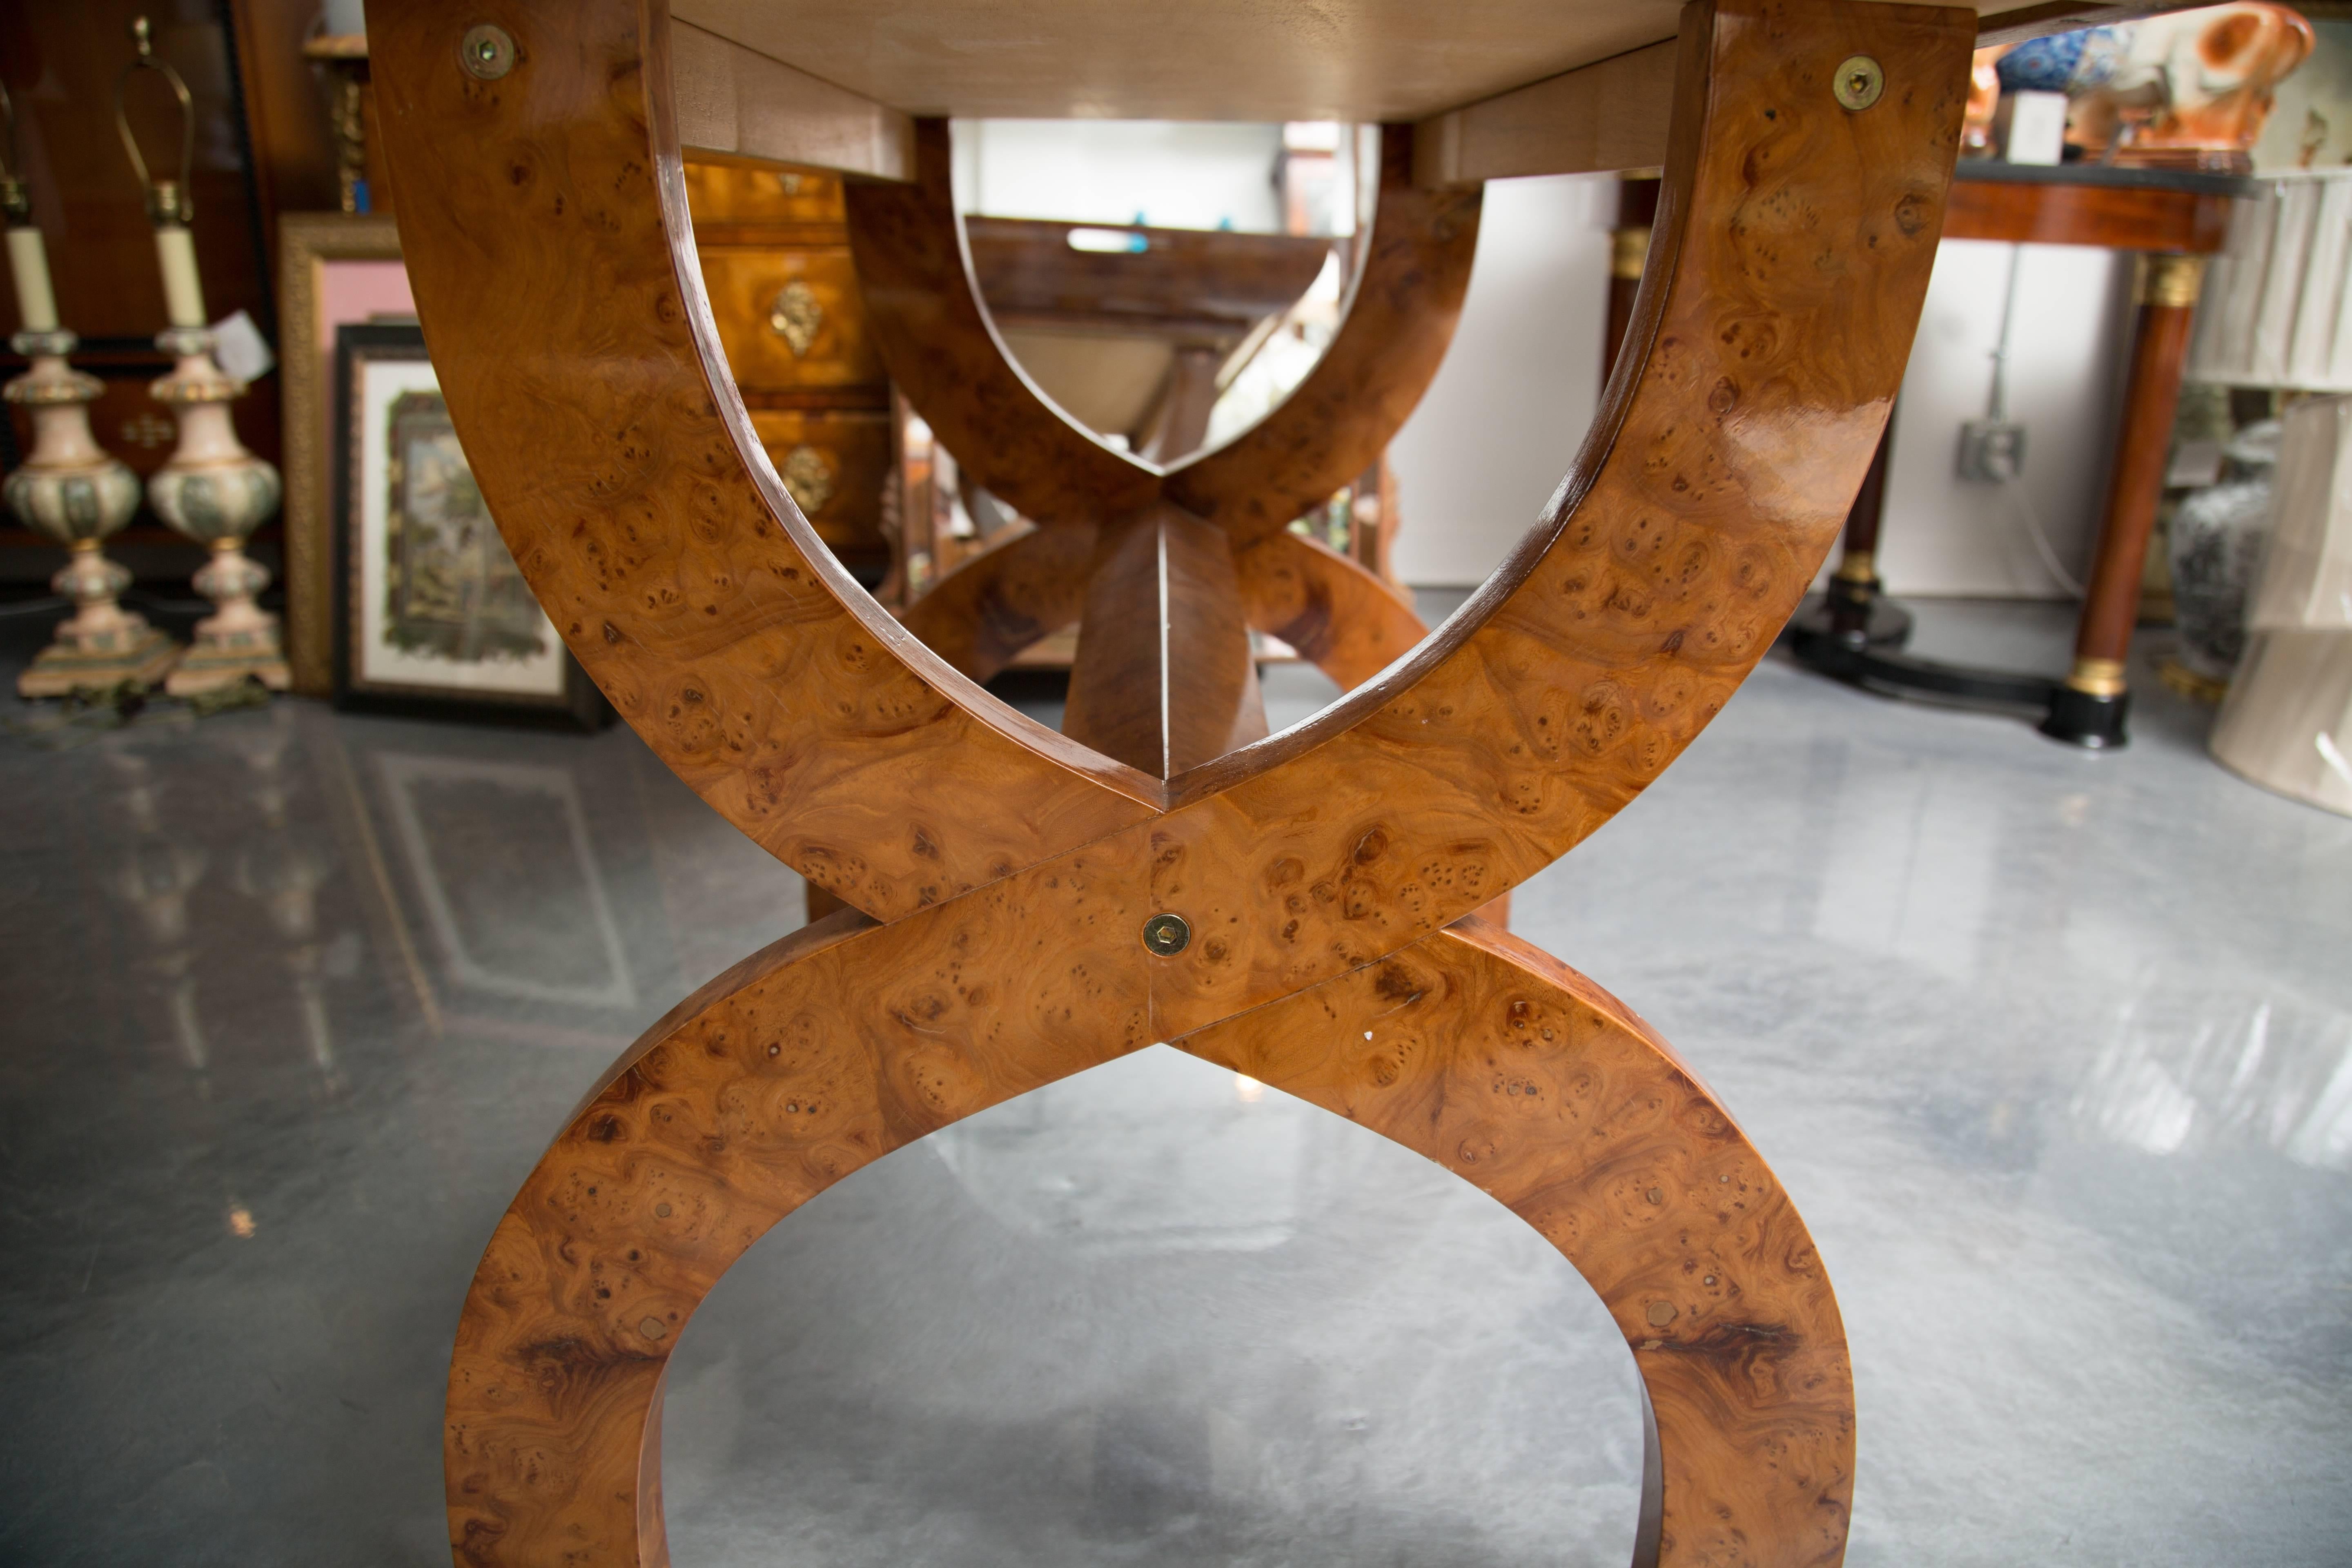 This is an elegant and unique amboyna wood tray within a deep recessed frame containing openings at the ends, enabling the large tray to be lifted off the base. The tray is stabilized by a pair of curved X-shaped supports joined by a round